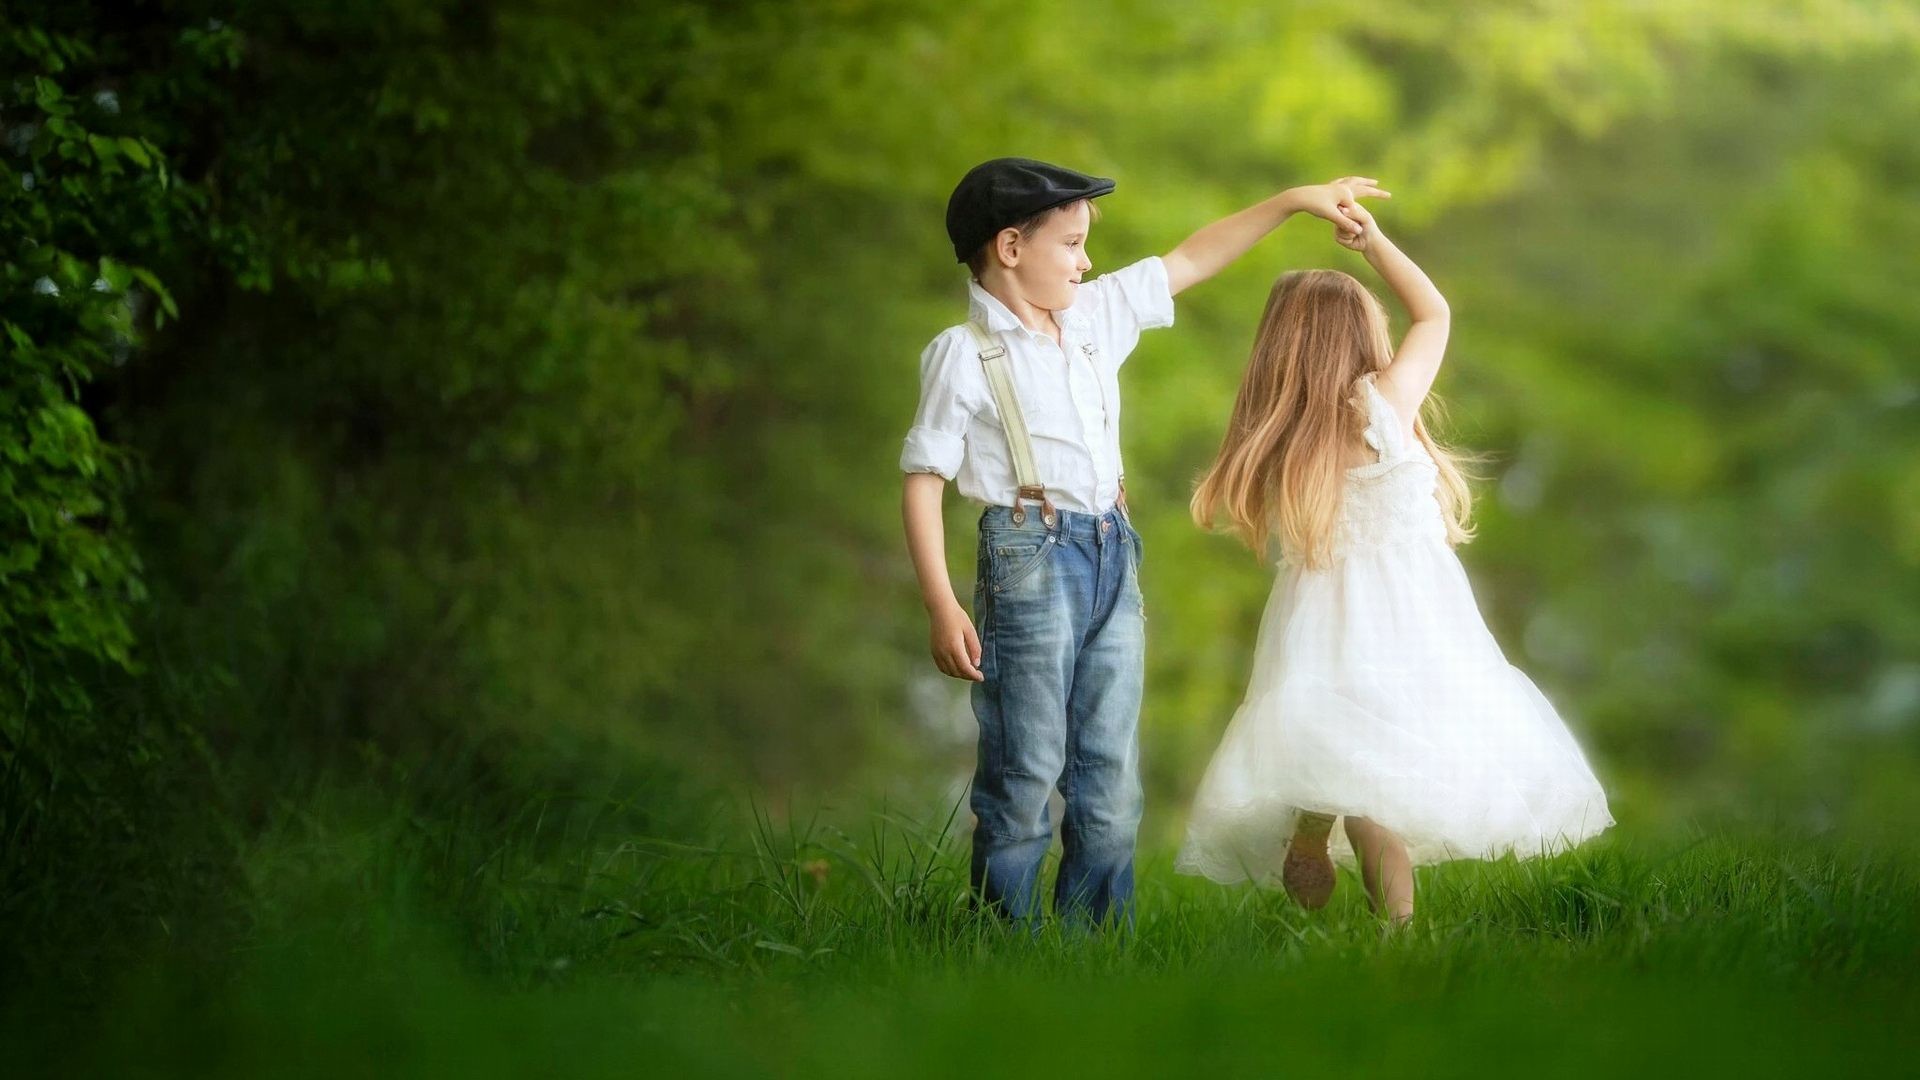 Funny Wallpaper Little Boy And Girl Dancing - Cute Boy And Girl In Love -  1920x1080 Wallpaper 